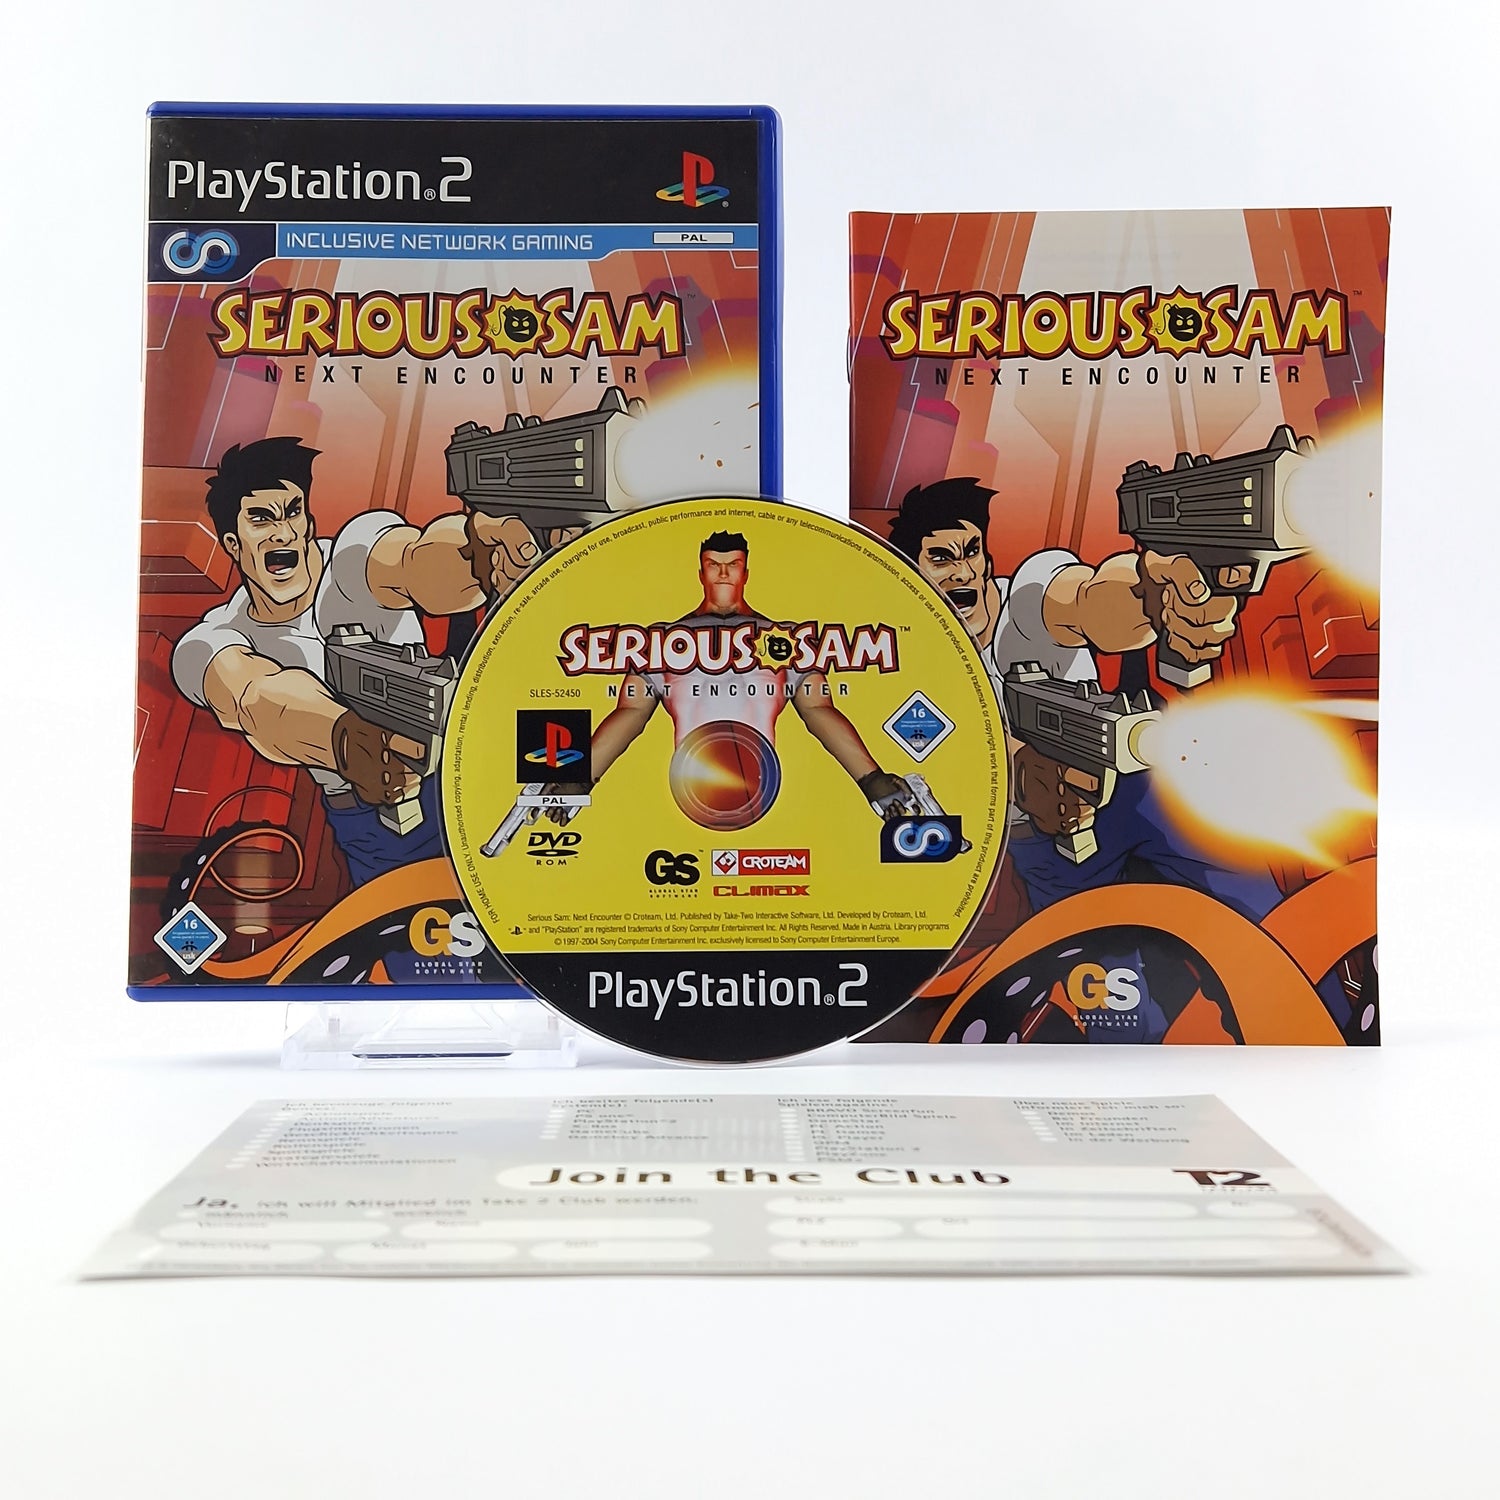 Playstation 2 game: Serious Sam Next Encounter - OVP instructions CD | PS2 PAL